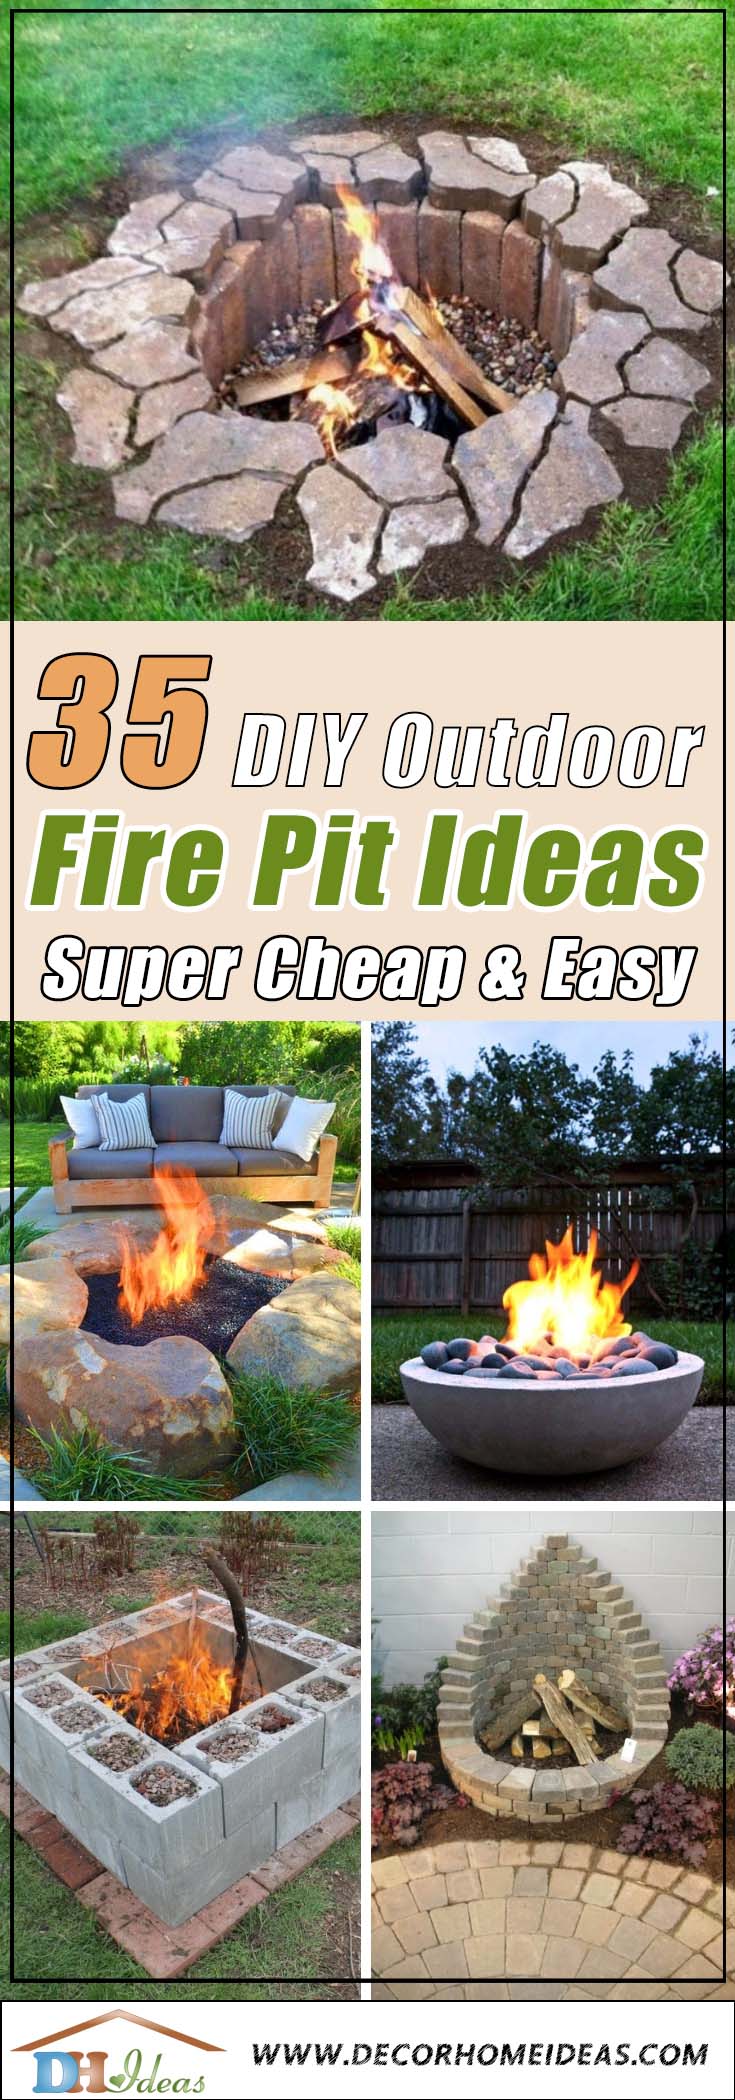 35 Easy To Do Fire Pit Ideas And, How To Build A Simple Brick Fire Pit Ideas